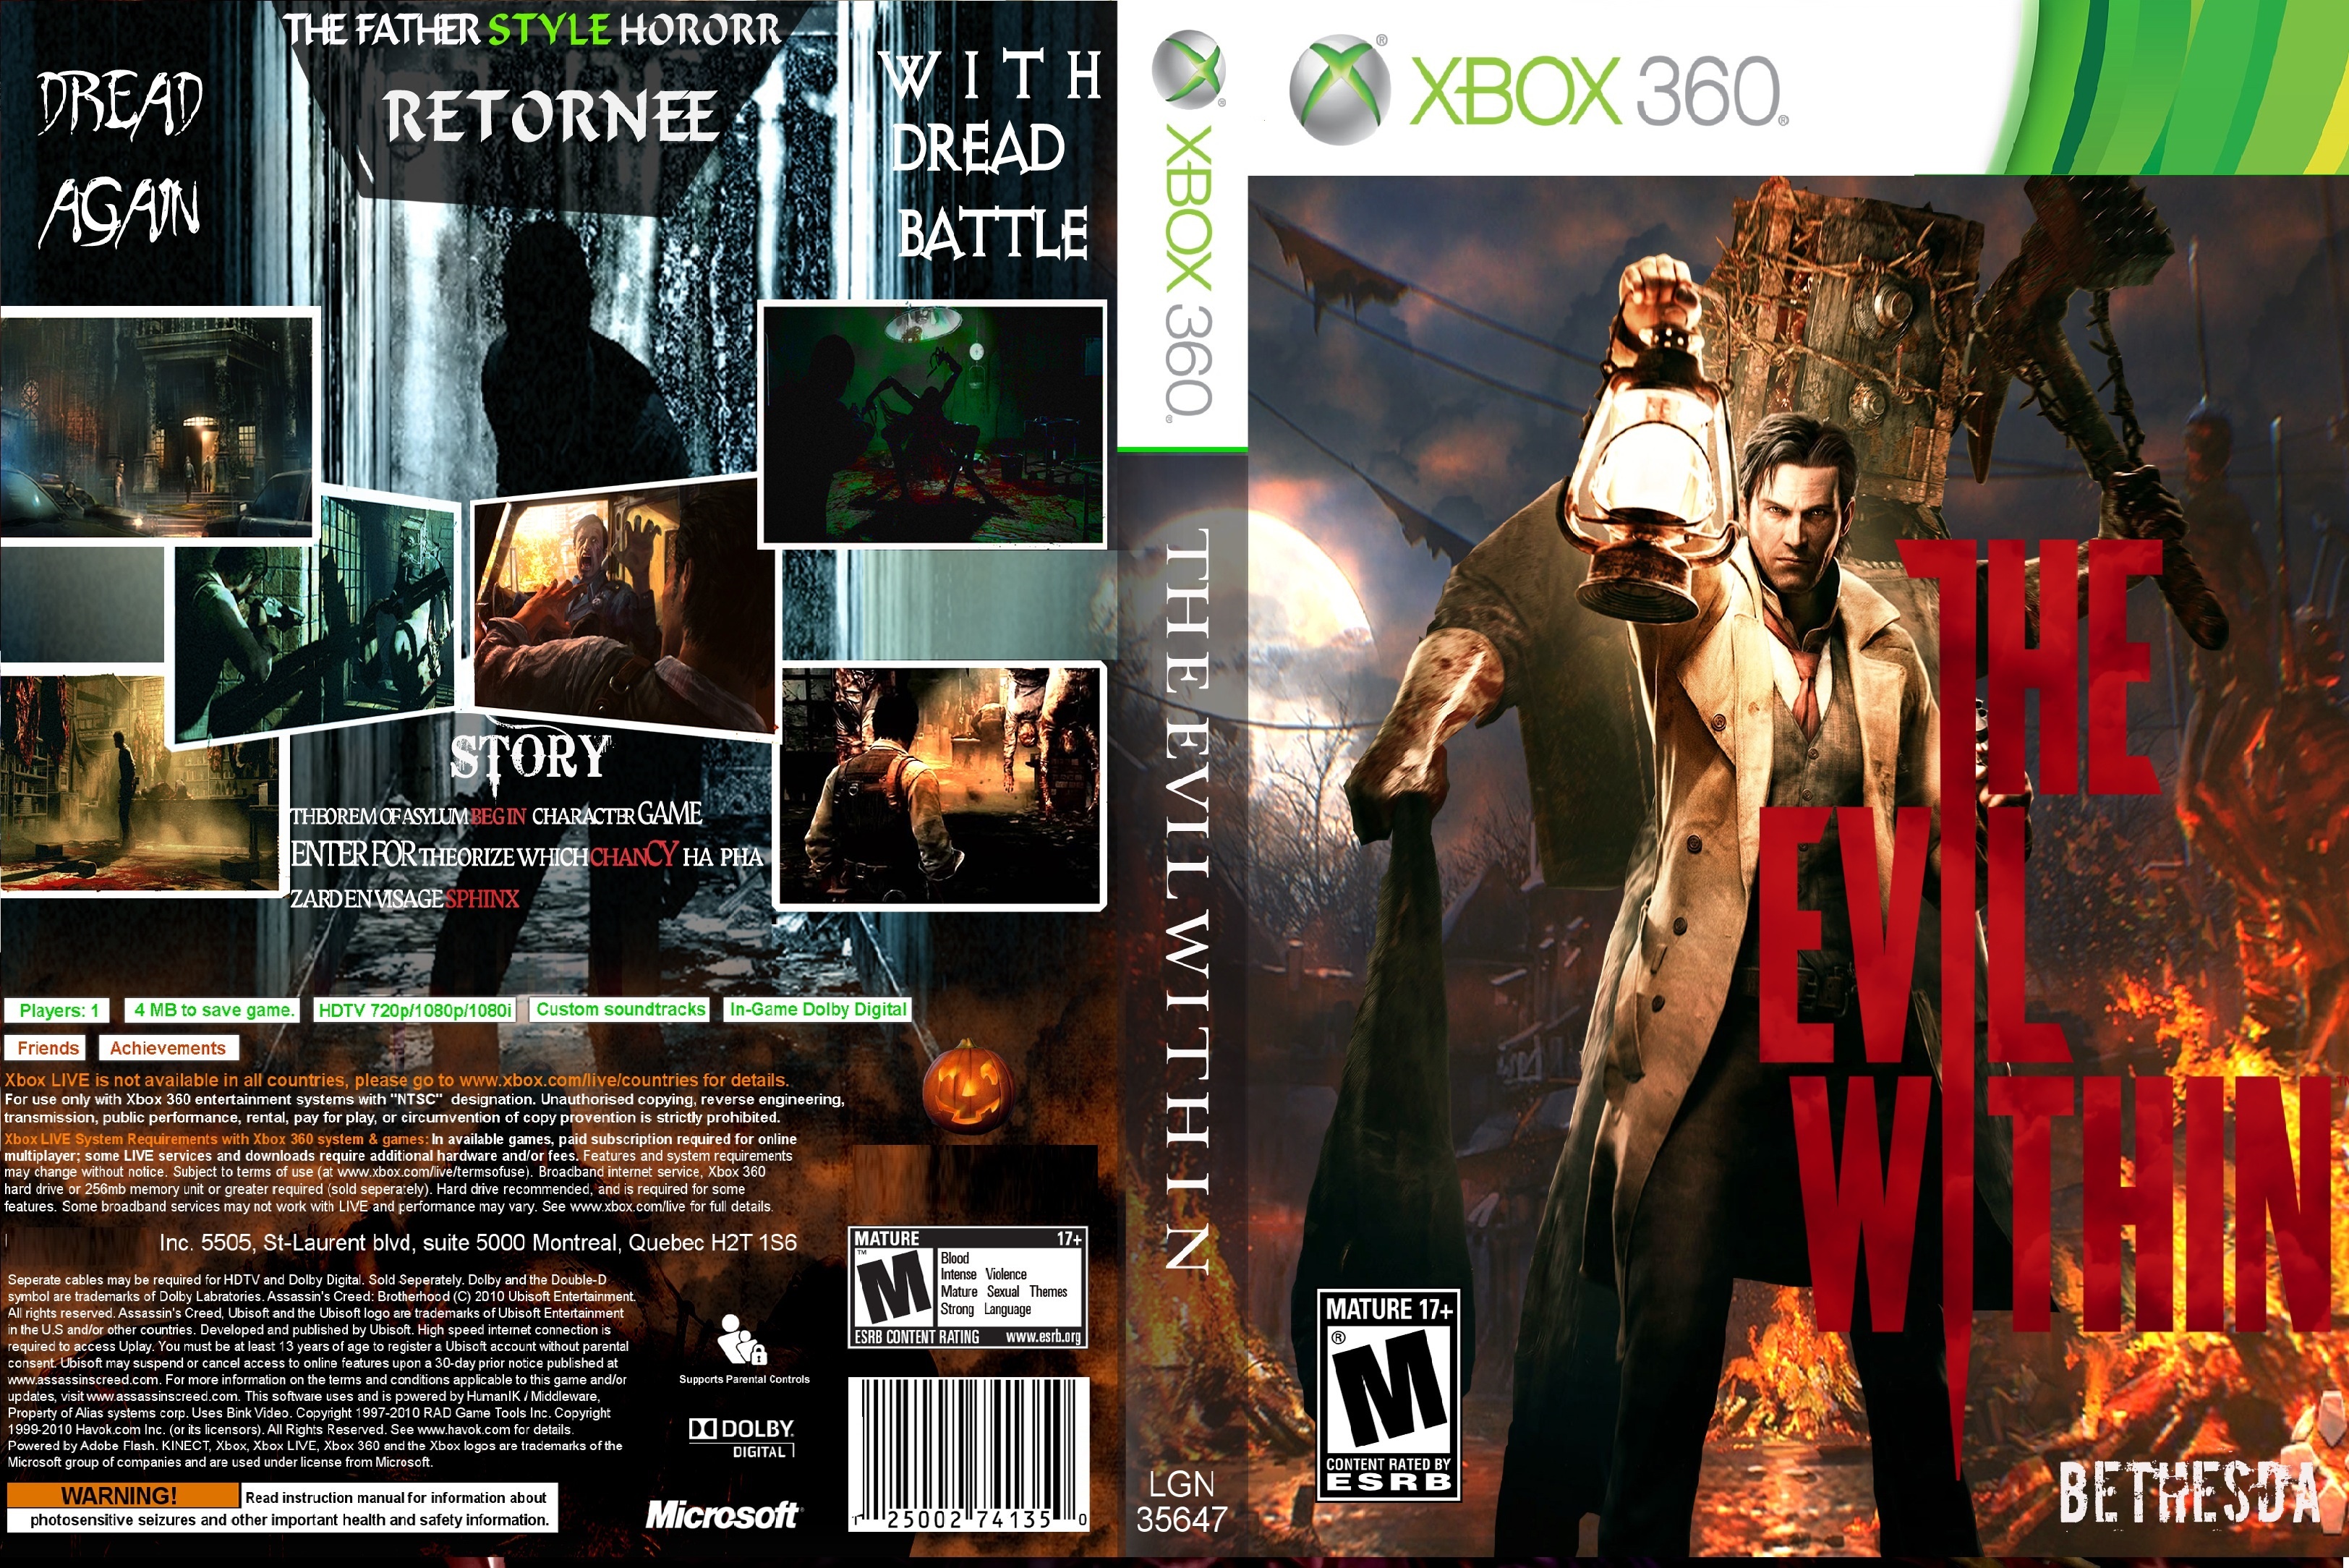 The Evil Within box cover